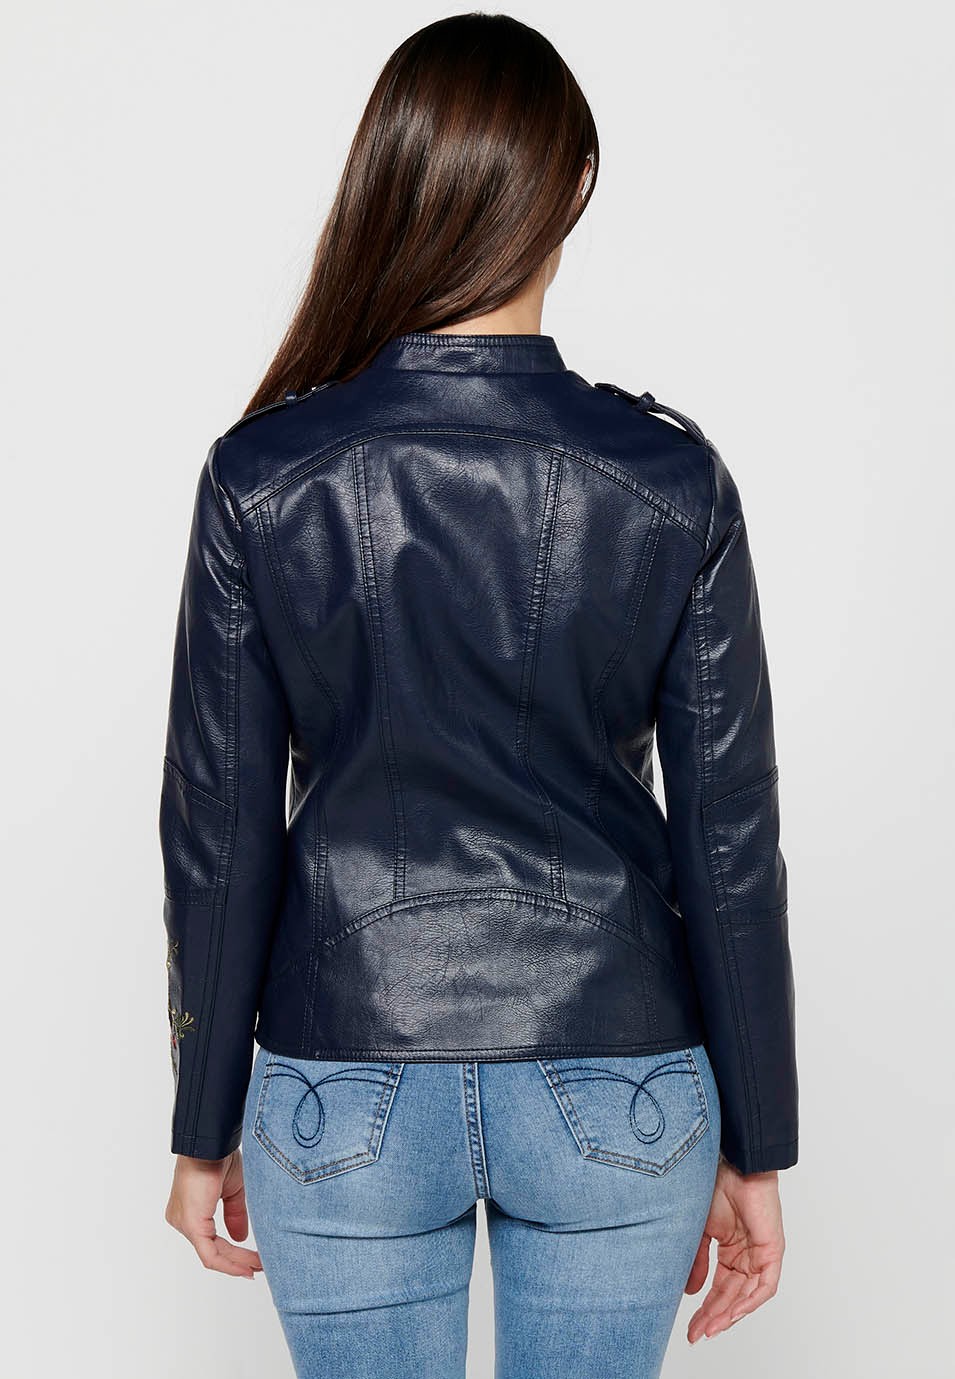 Leather-effect jacket with front zipper closure with floral embroidered details with round neck and front pockets in Navy for Women 1